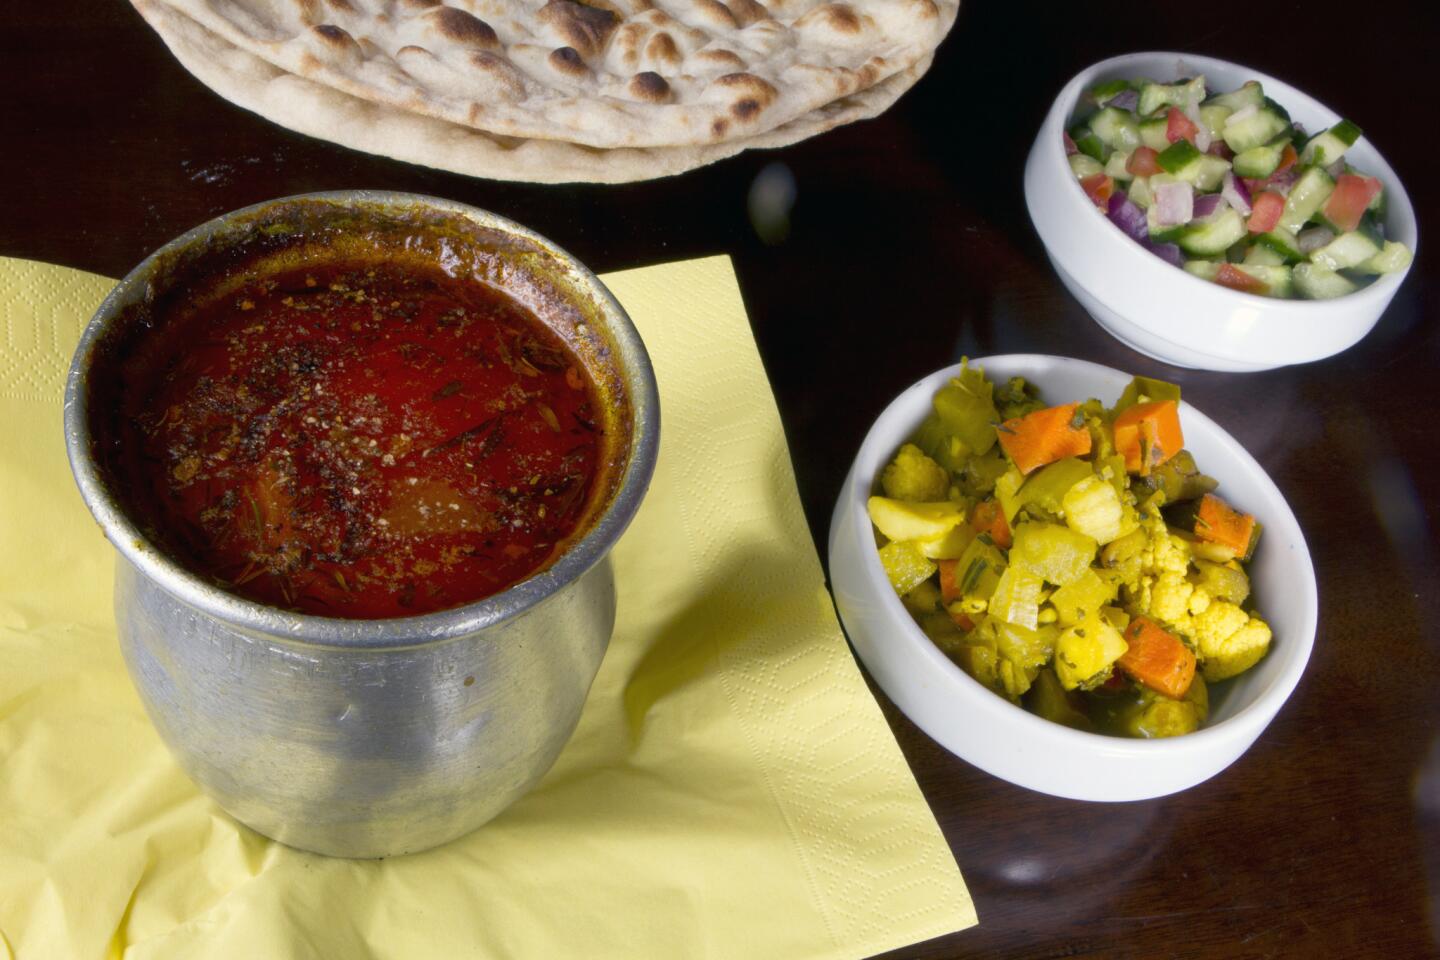 Dizi, left, a dish made with lamb meat, potato, tomato, turmeric and garbanzo and white beans baked in the oven for three hours, at Nersses Vanak Persian restaurant in Glendale.